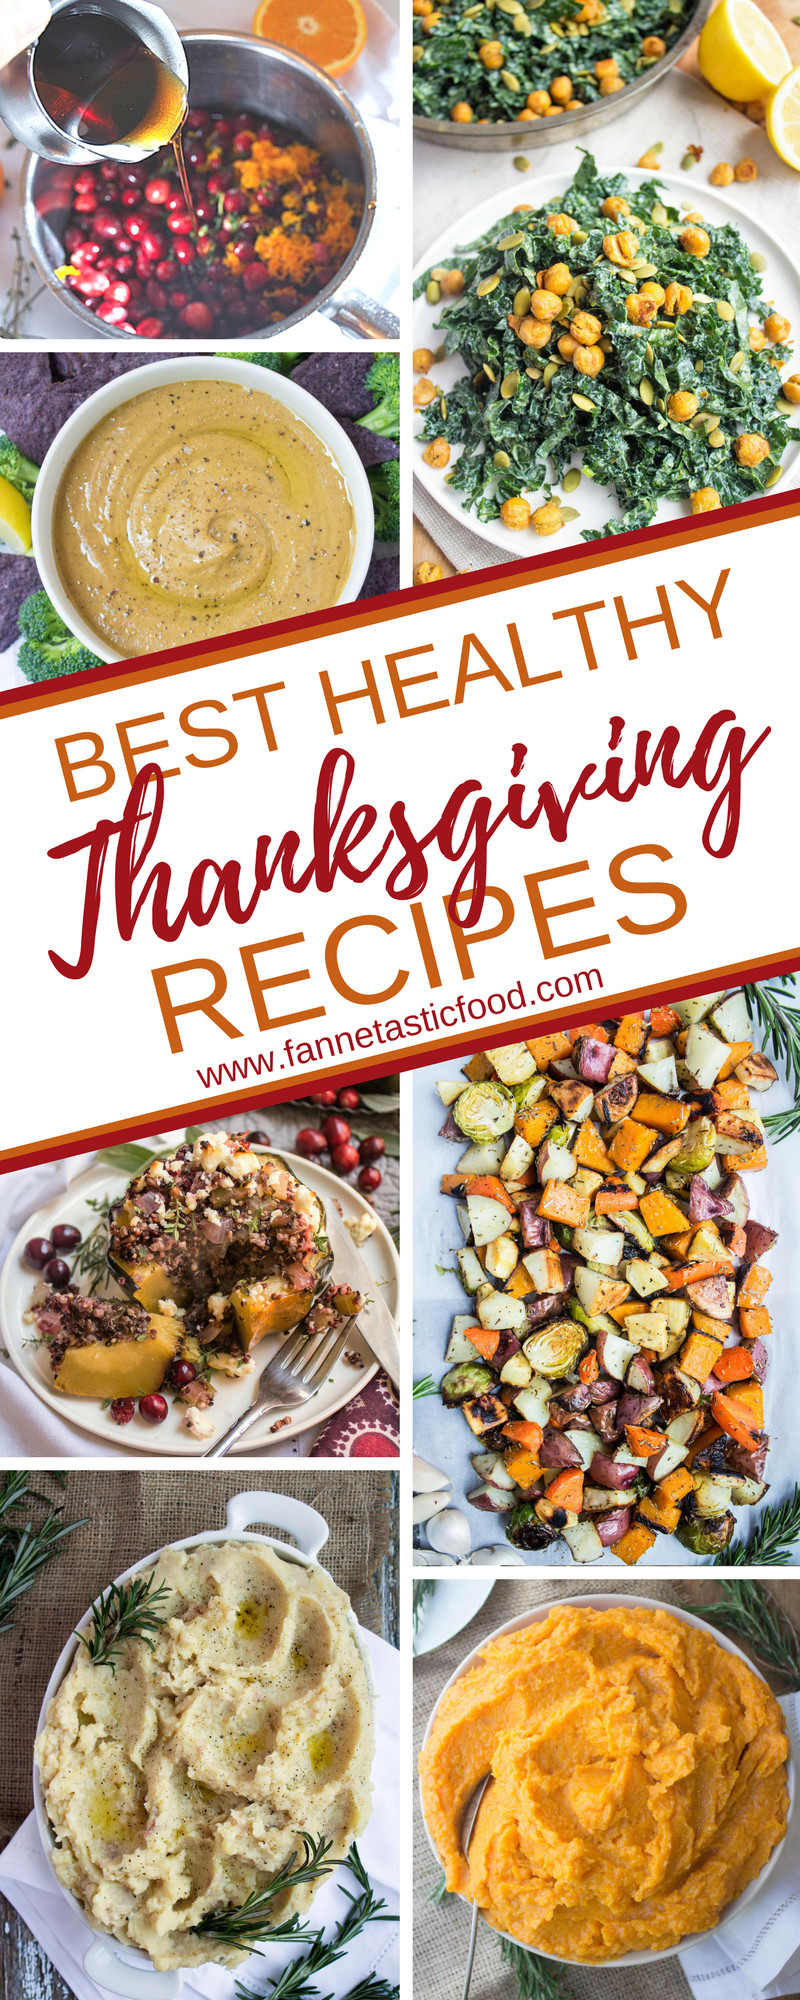 Healthy Thanksgiving Dishes
 Best Healthy Thanksgiving Recipes